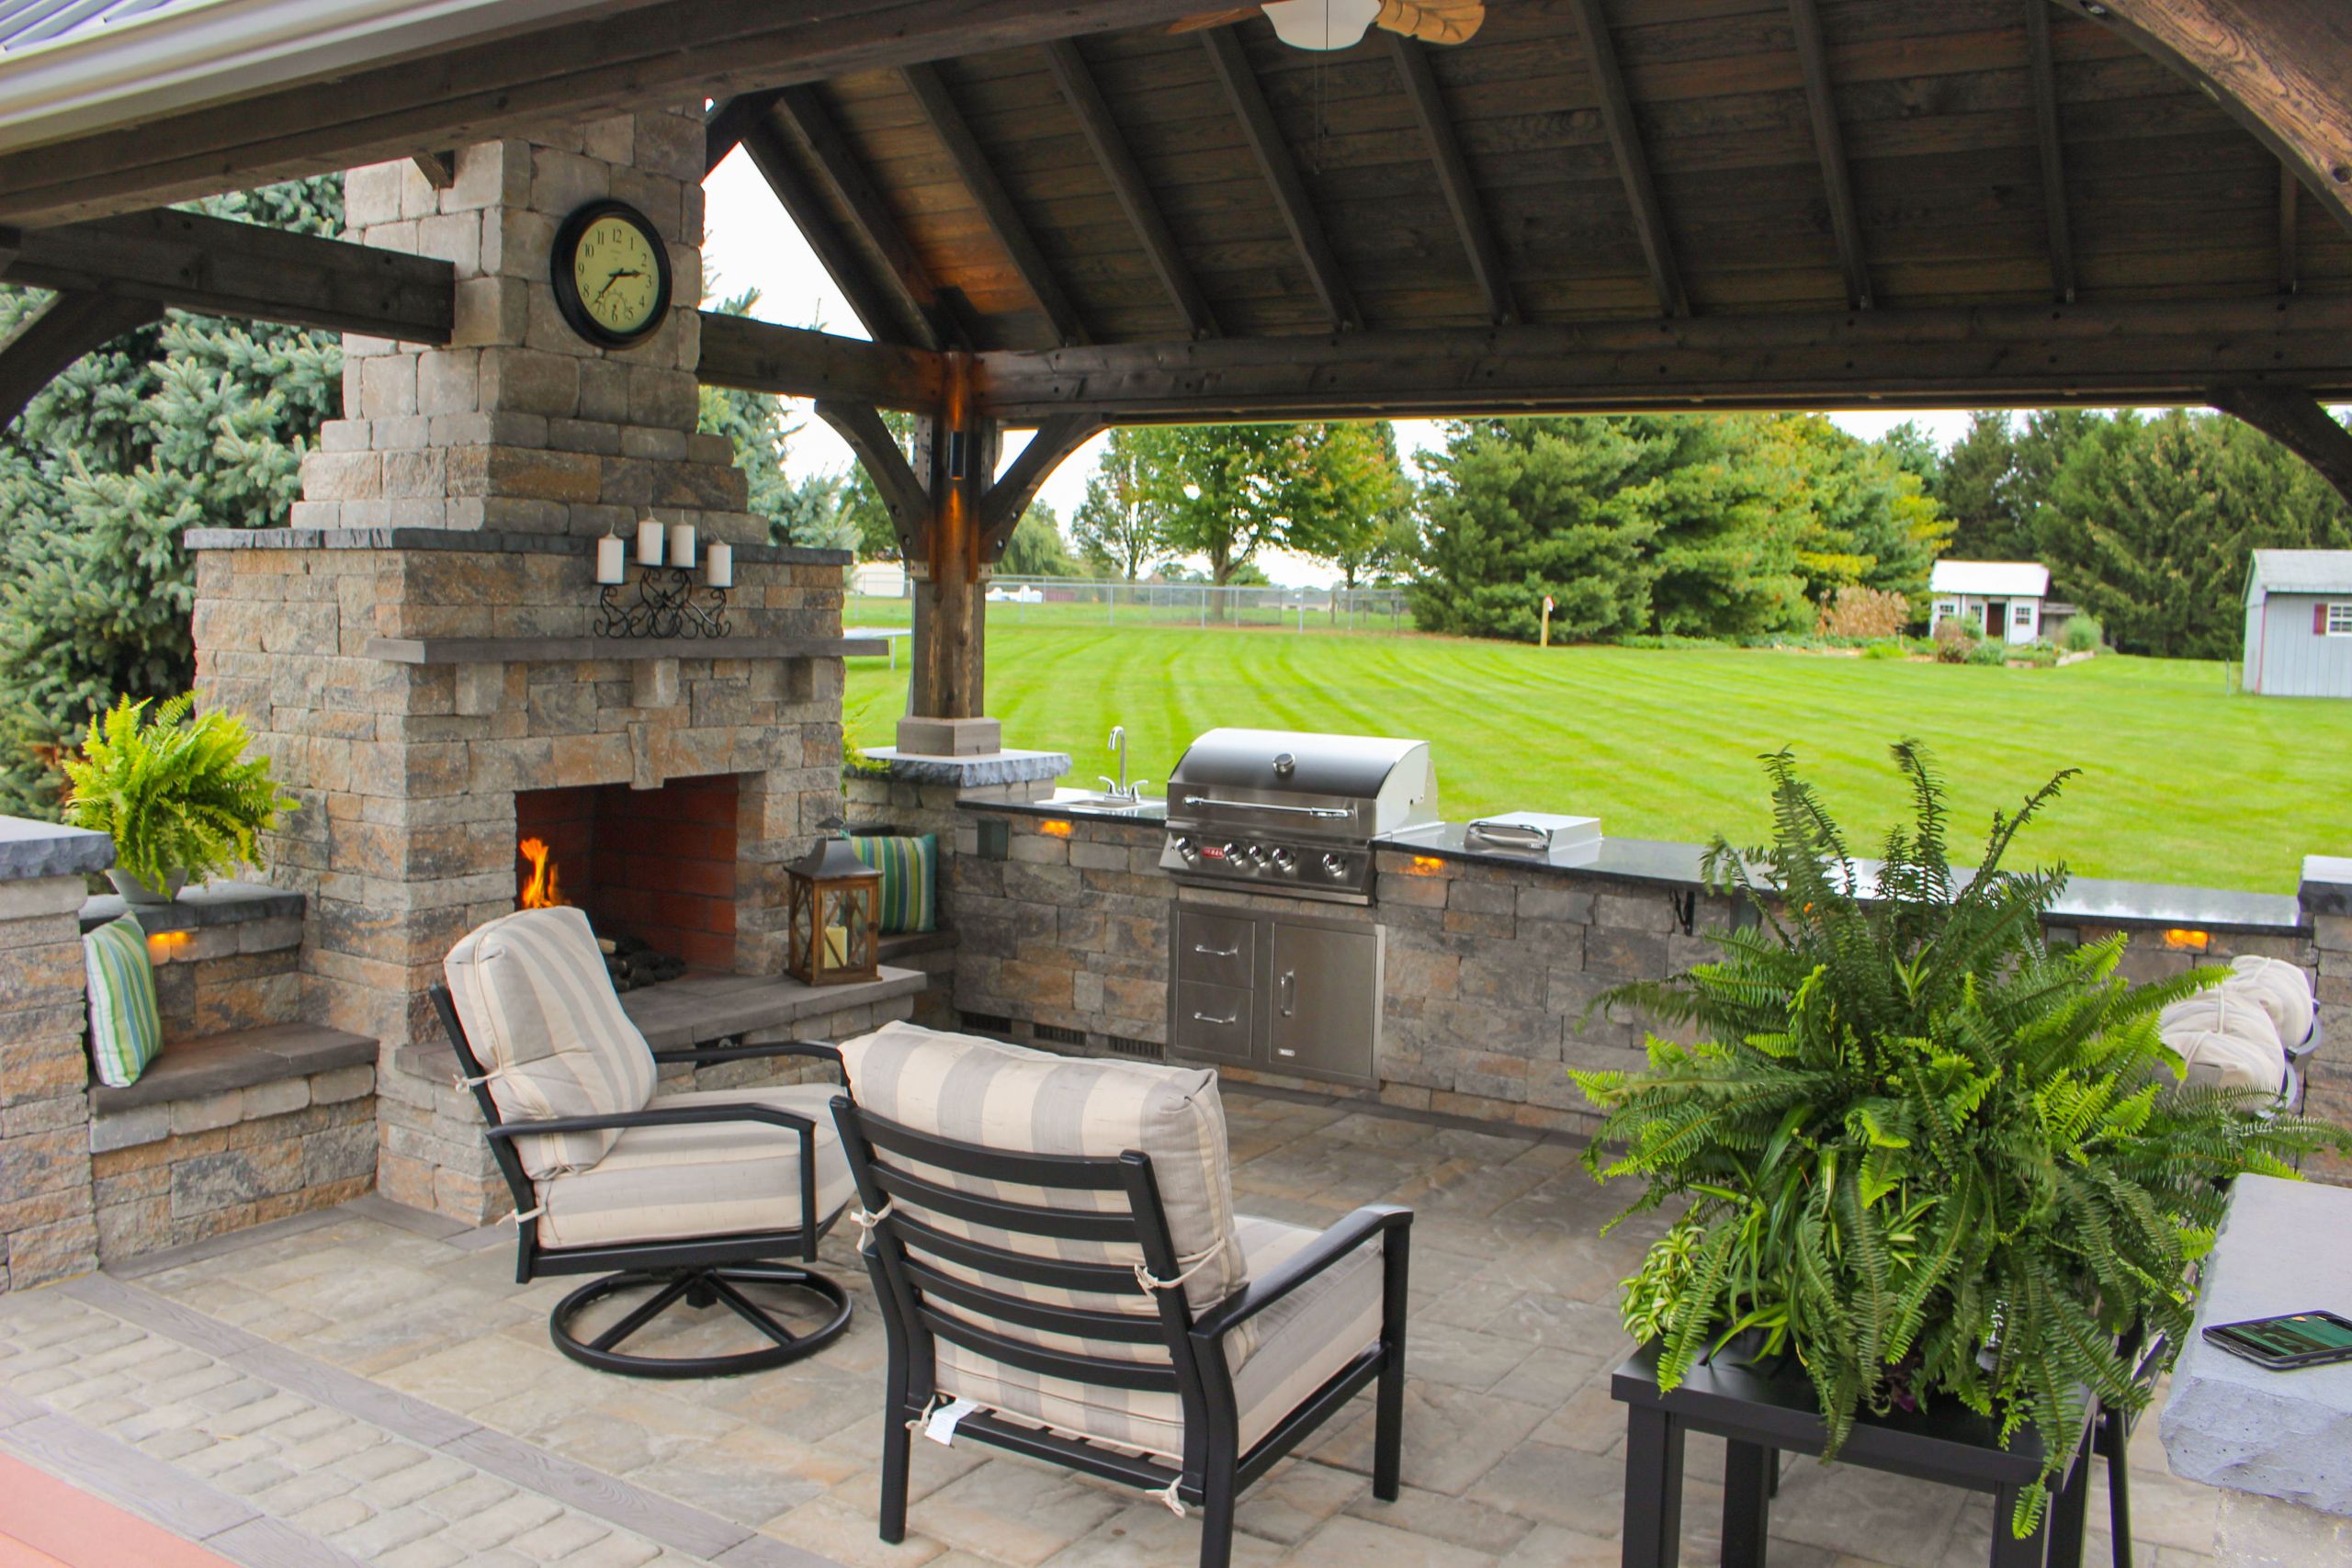 Outdoor Kitchen And Patio
 Outdoor Patio with Pavilion